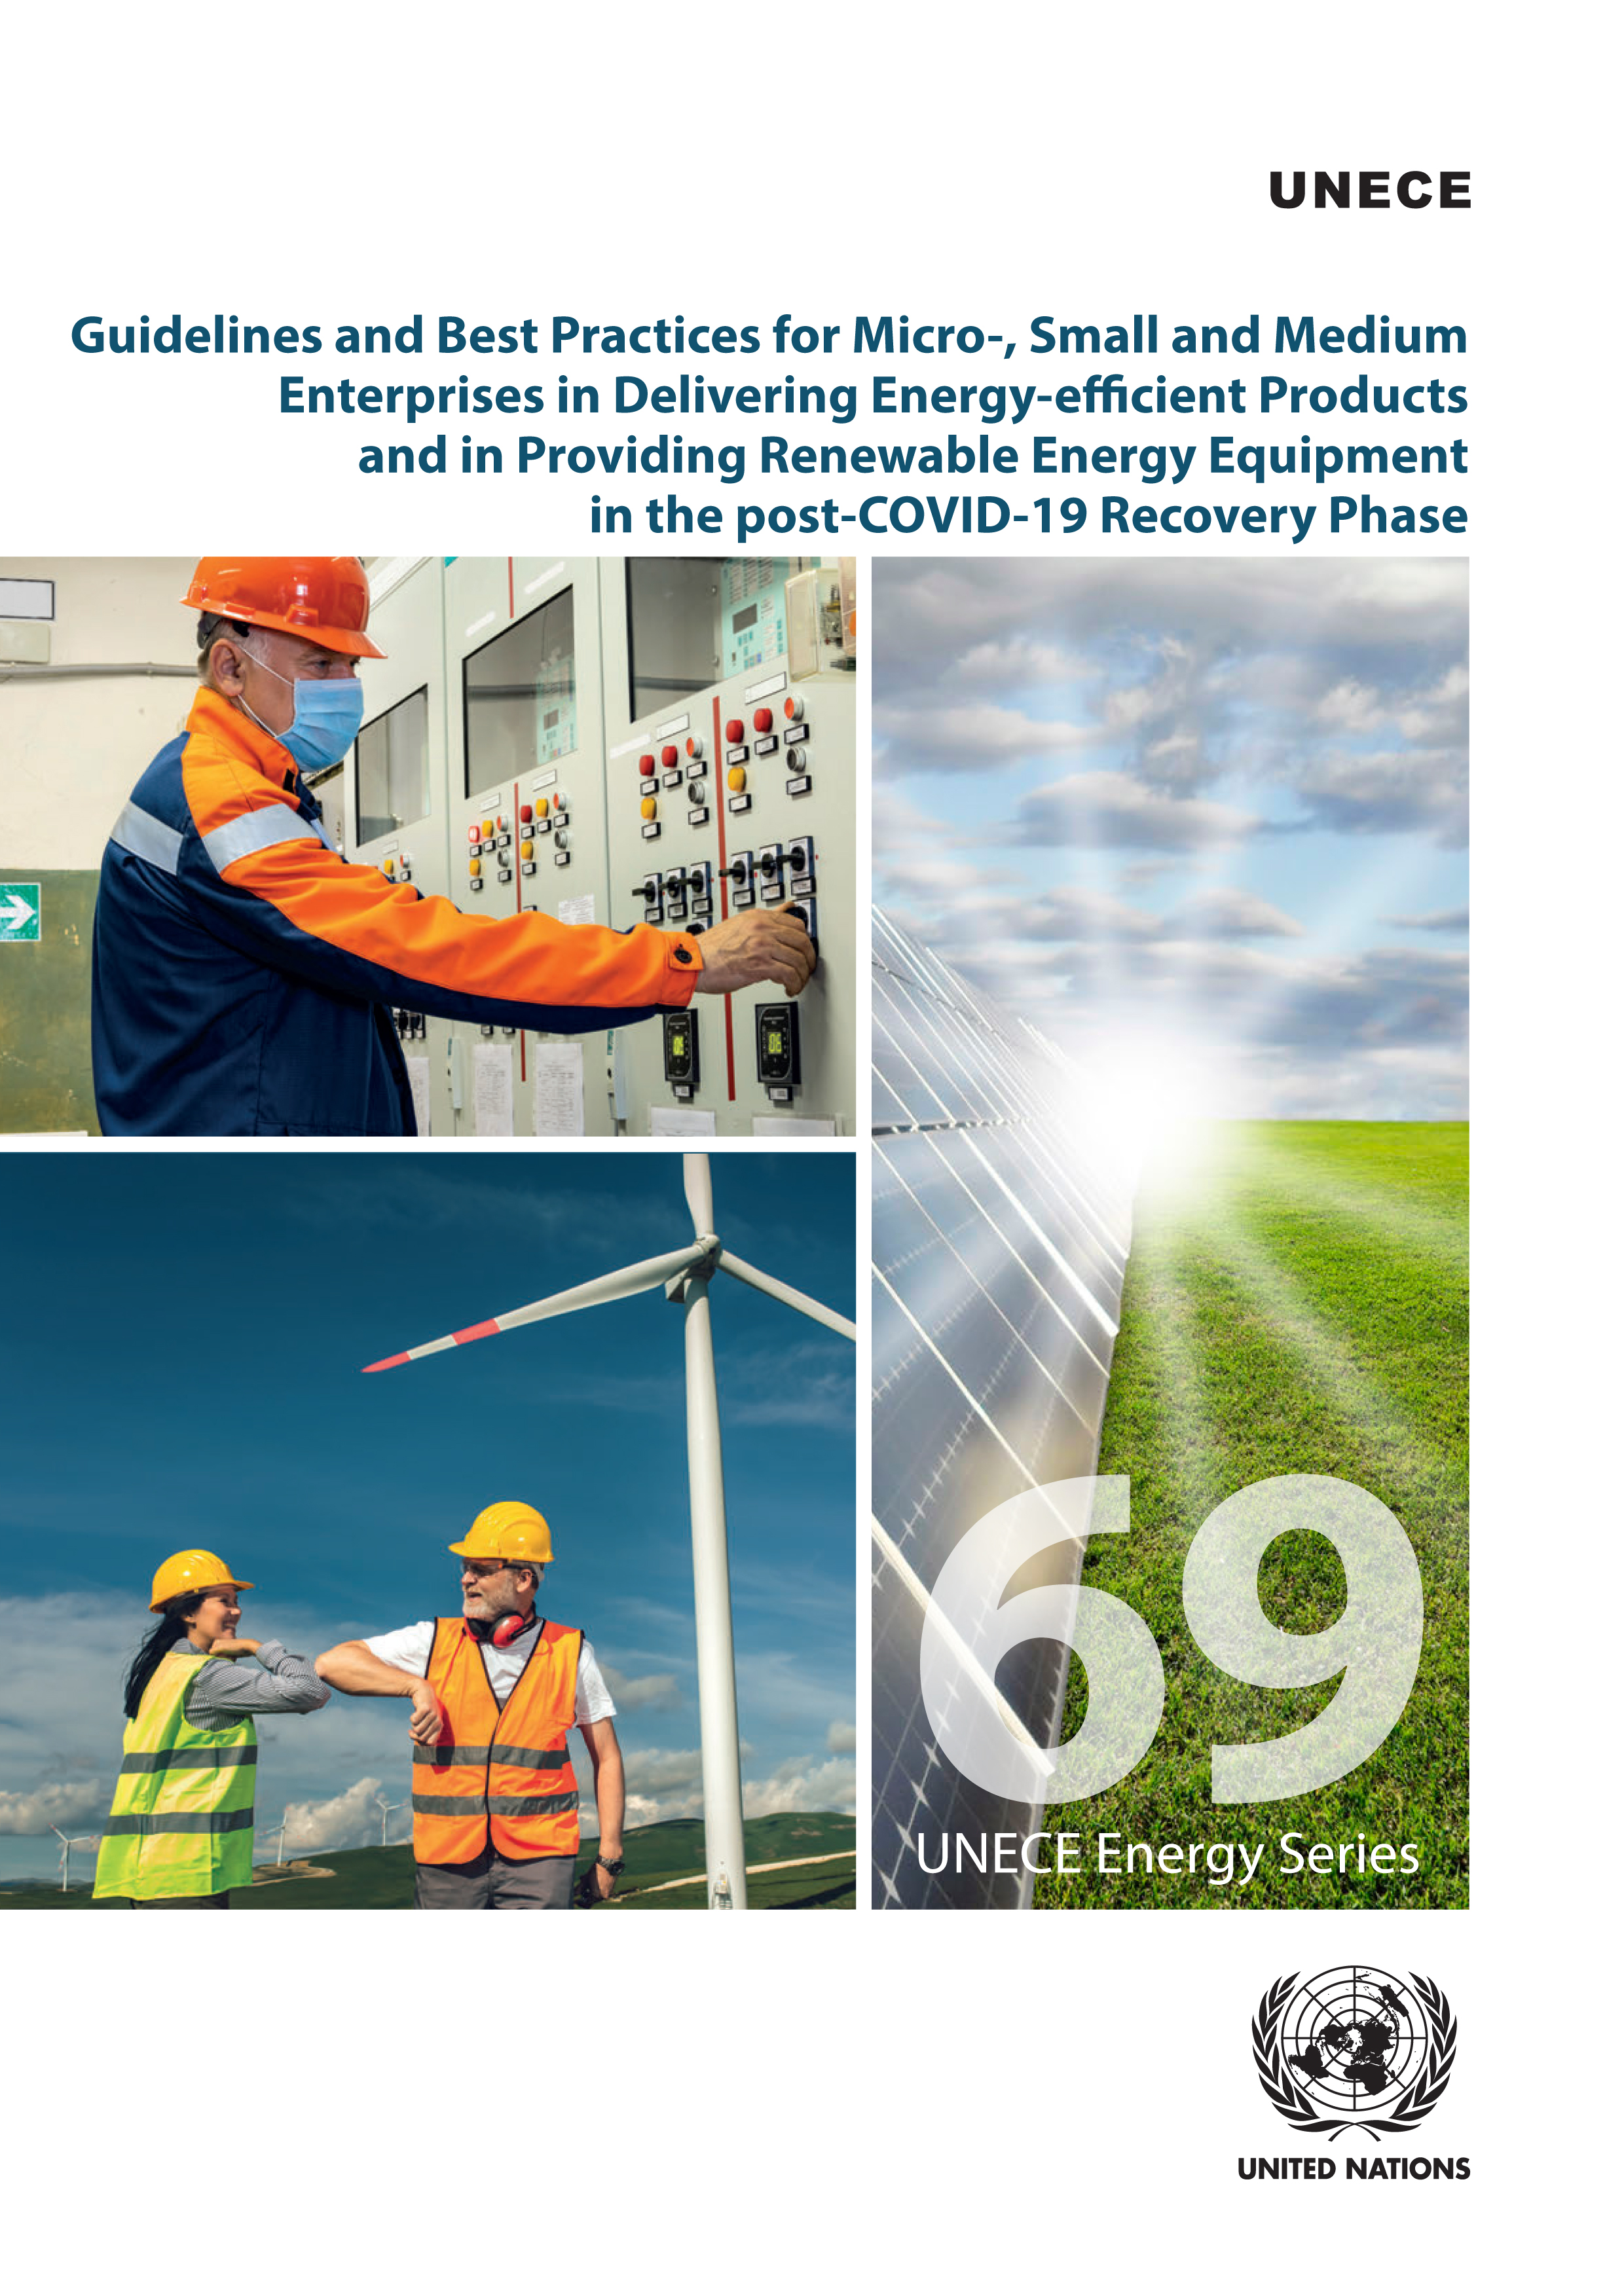 image of Guidelines and Best Practices for Micro-, Small and Medium Enterprises in Delivering Energy-Efficient Products and in Providing Renewable Energy Equipment in the Post-COVID-19 Recovery Phase